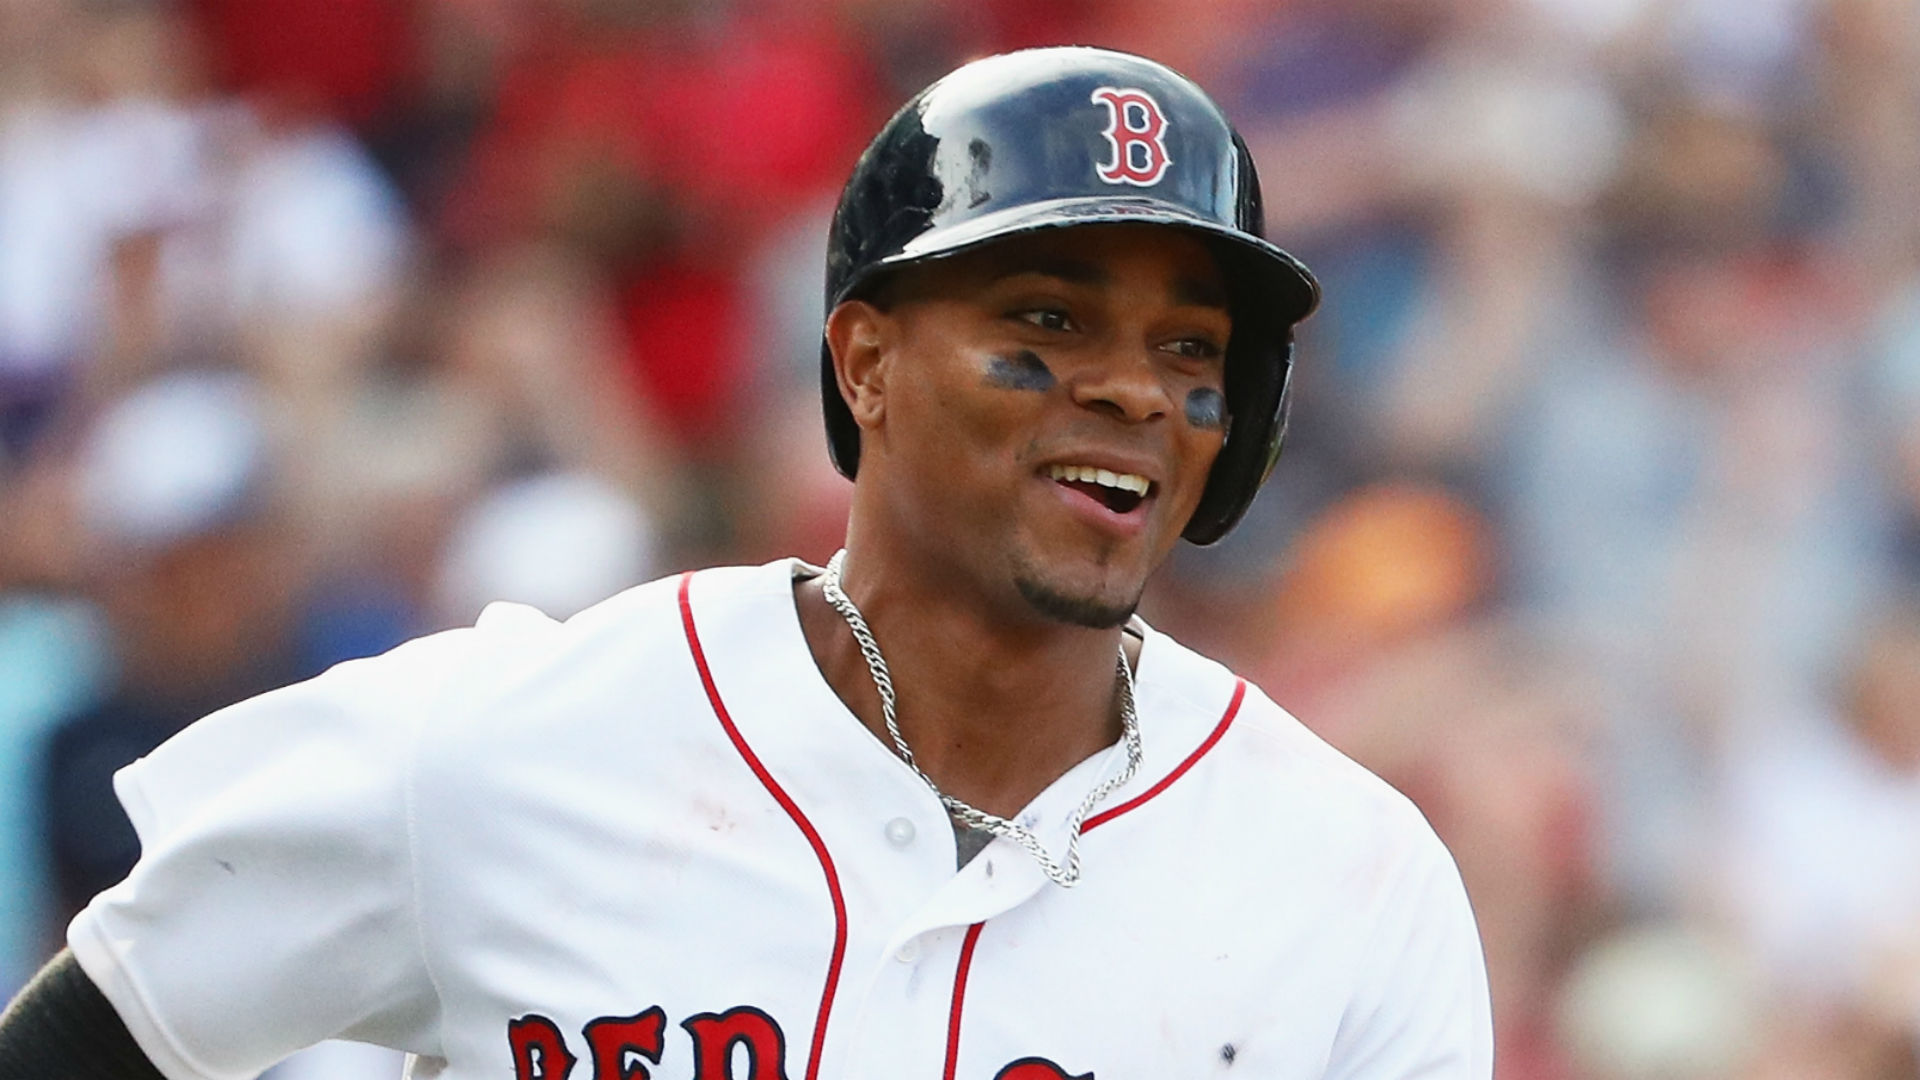 Red Sox place Xander Bogaerts on 10-day DL with ankle injury | MLB | Sporting News1920 x 1080